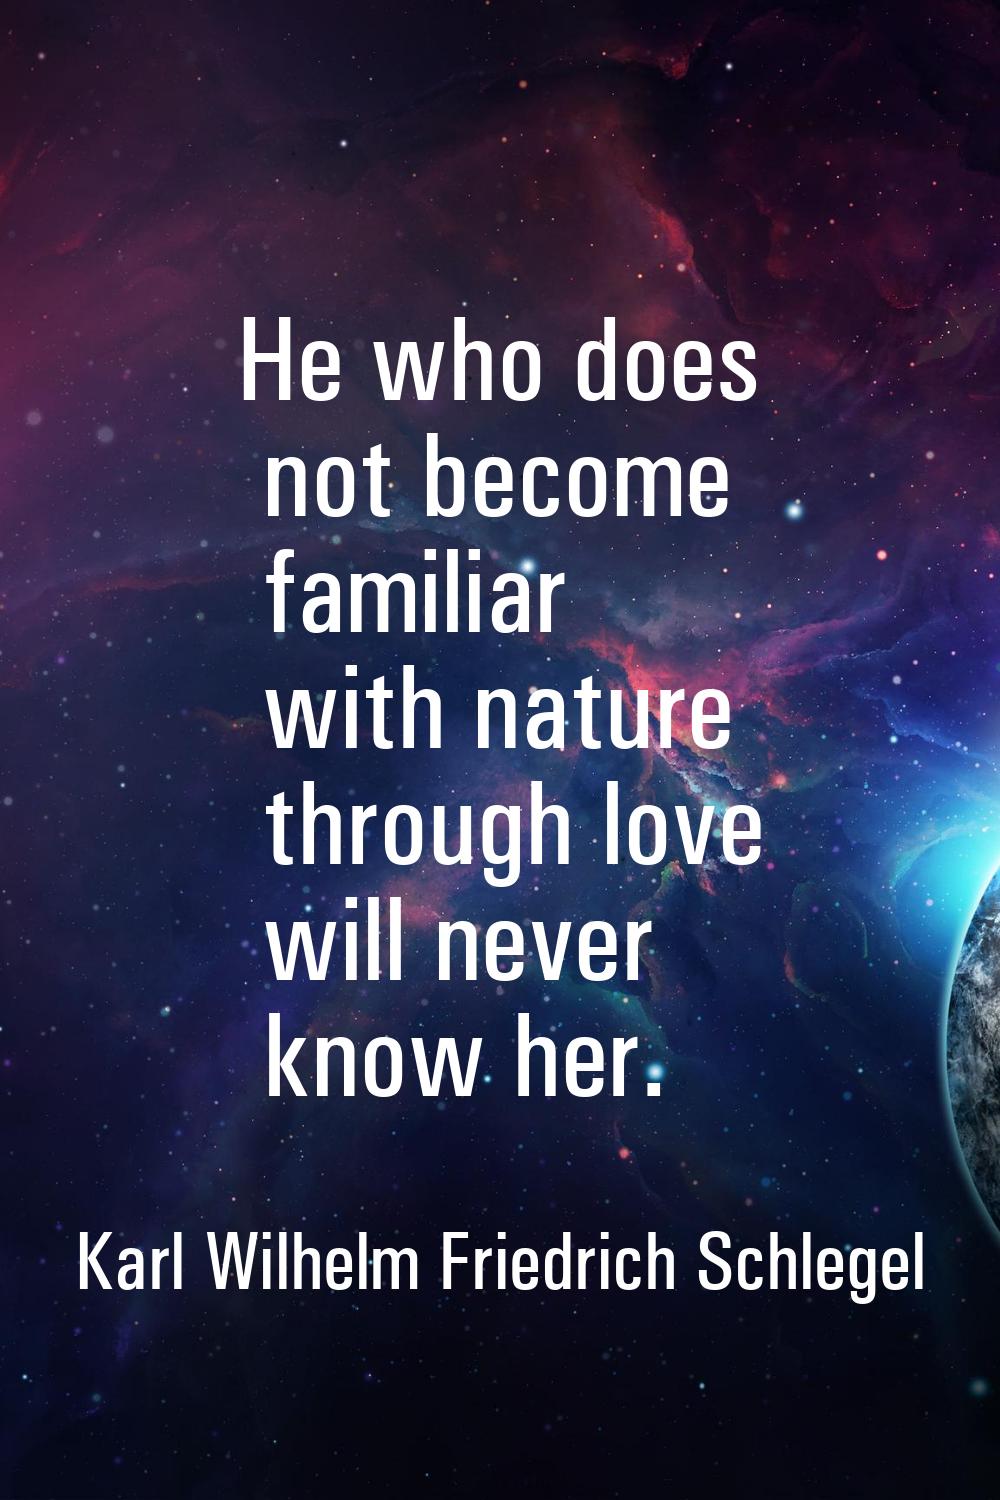 He who does not become familiar with nature through love will never know her.